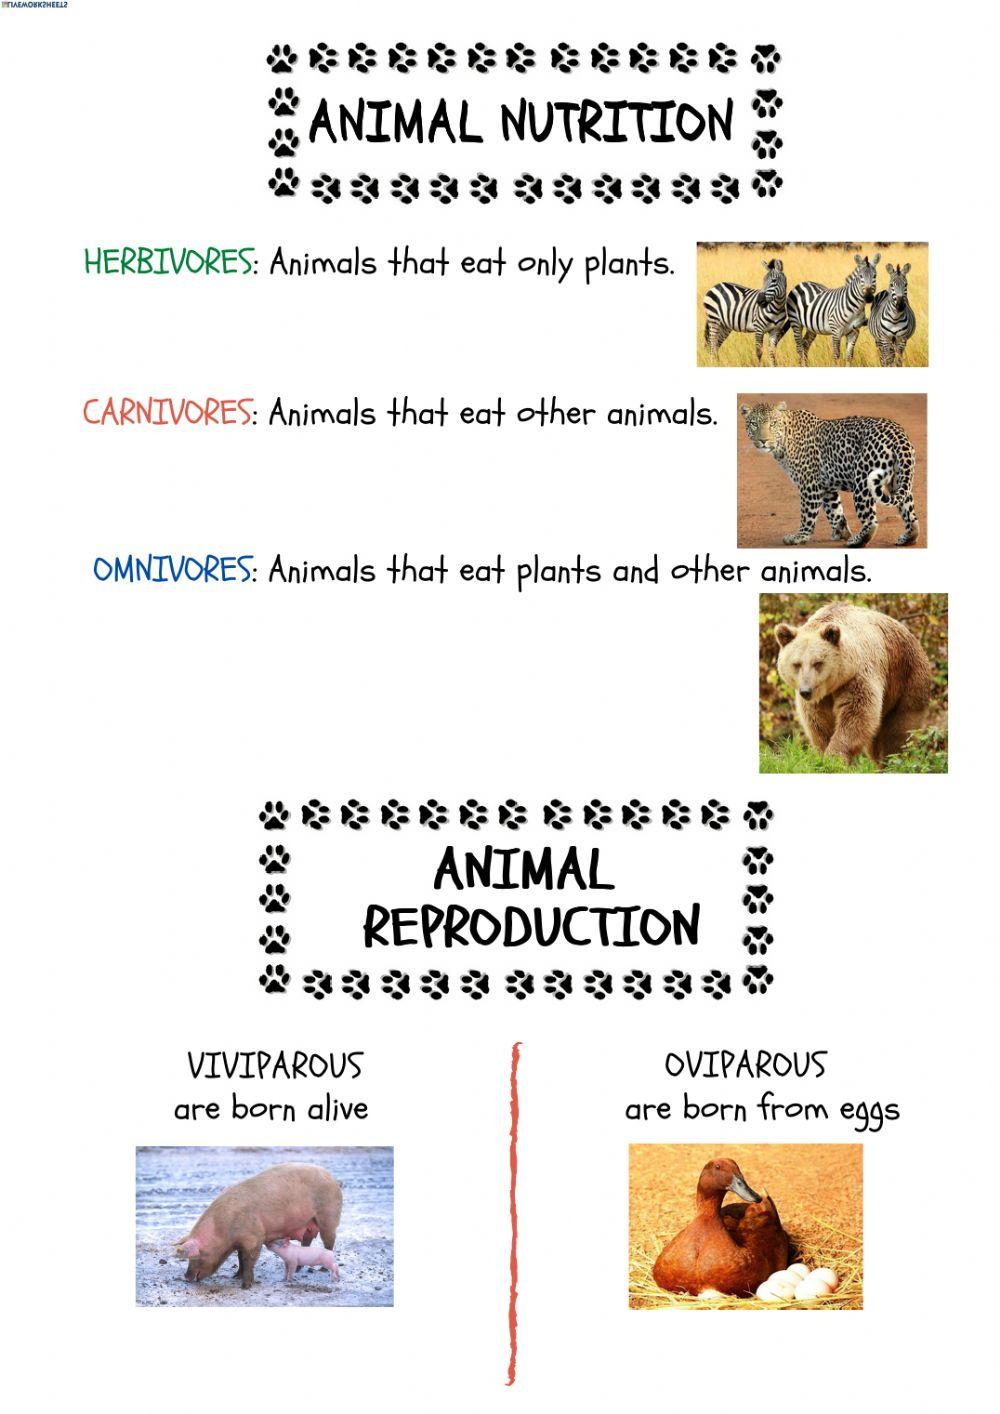 Animals: Nutritiona and reproduction